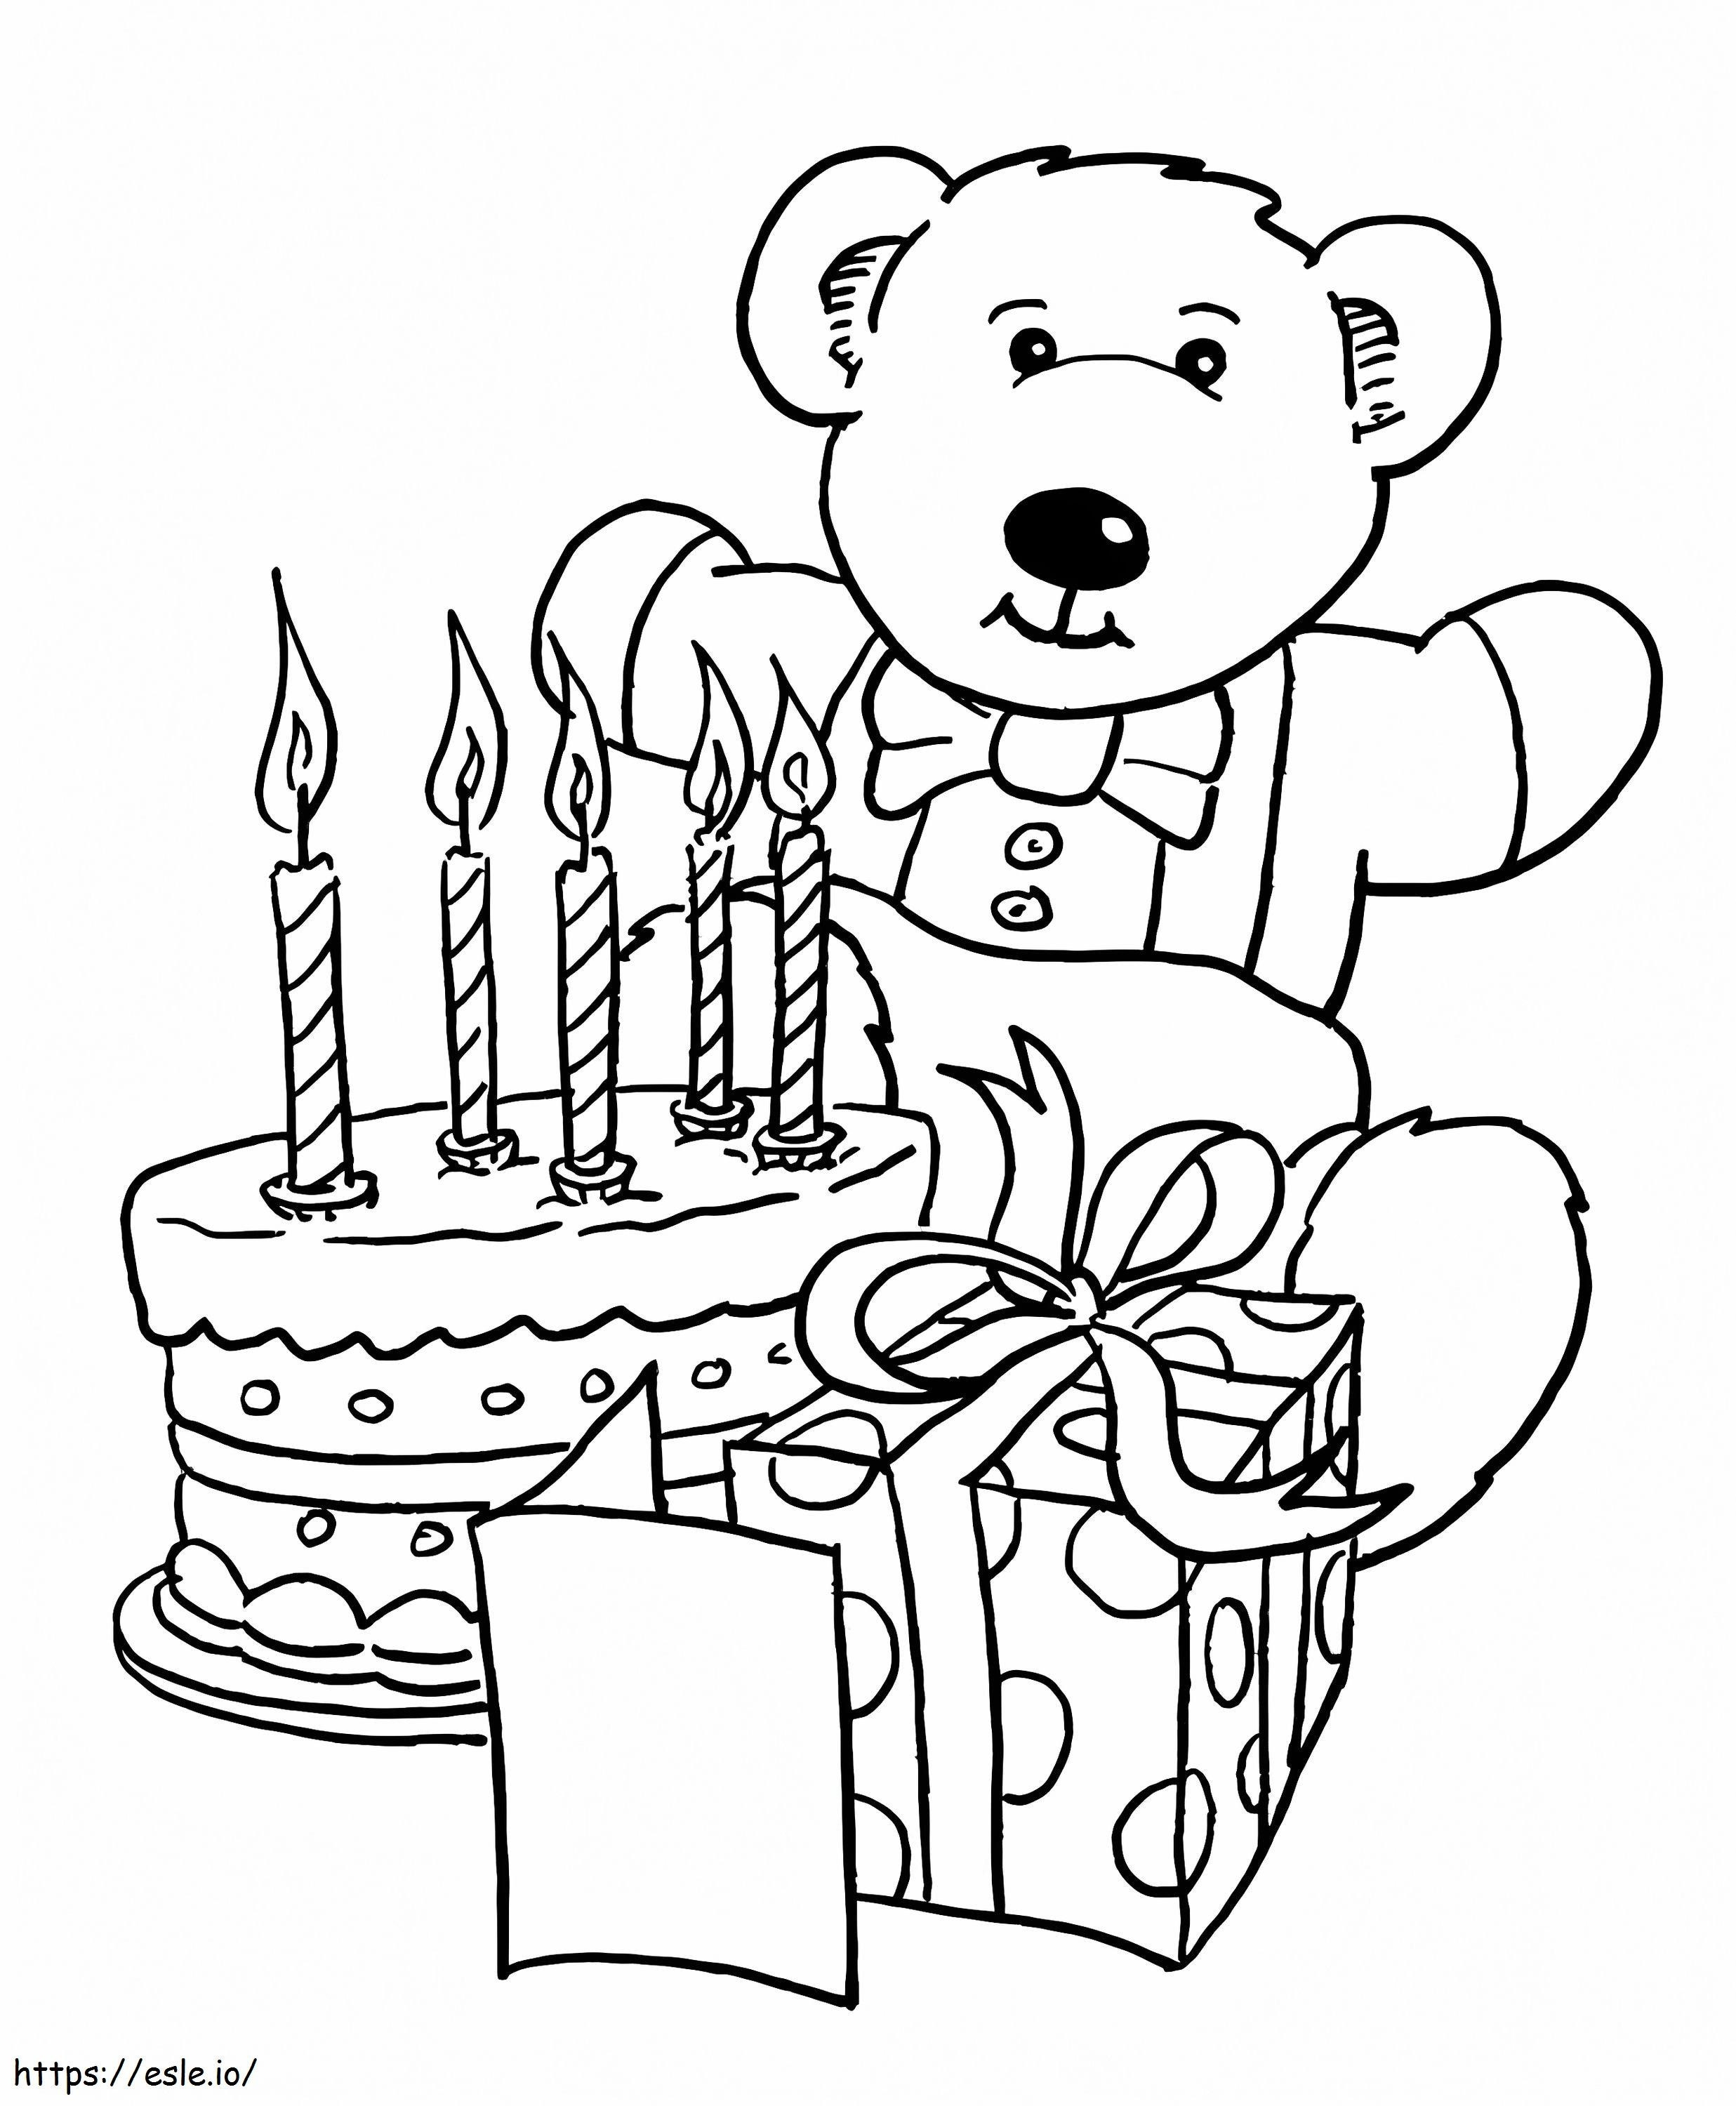 Toys And Birthday Cake coloring page